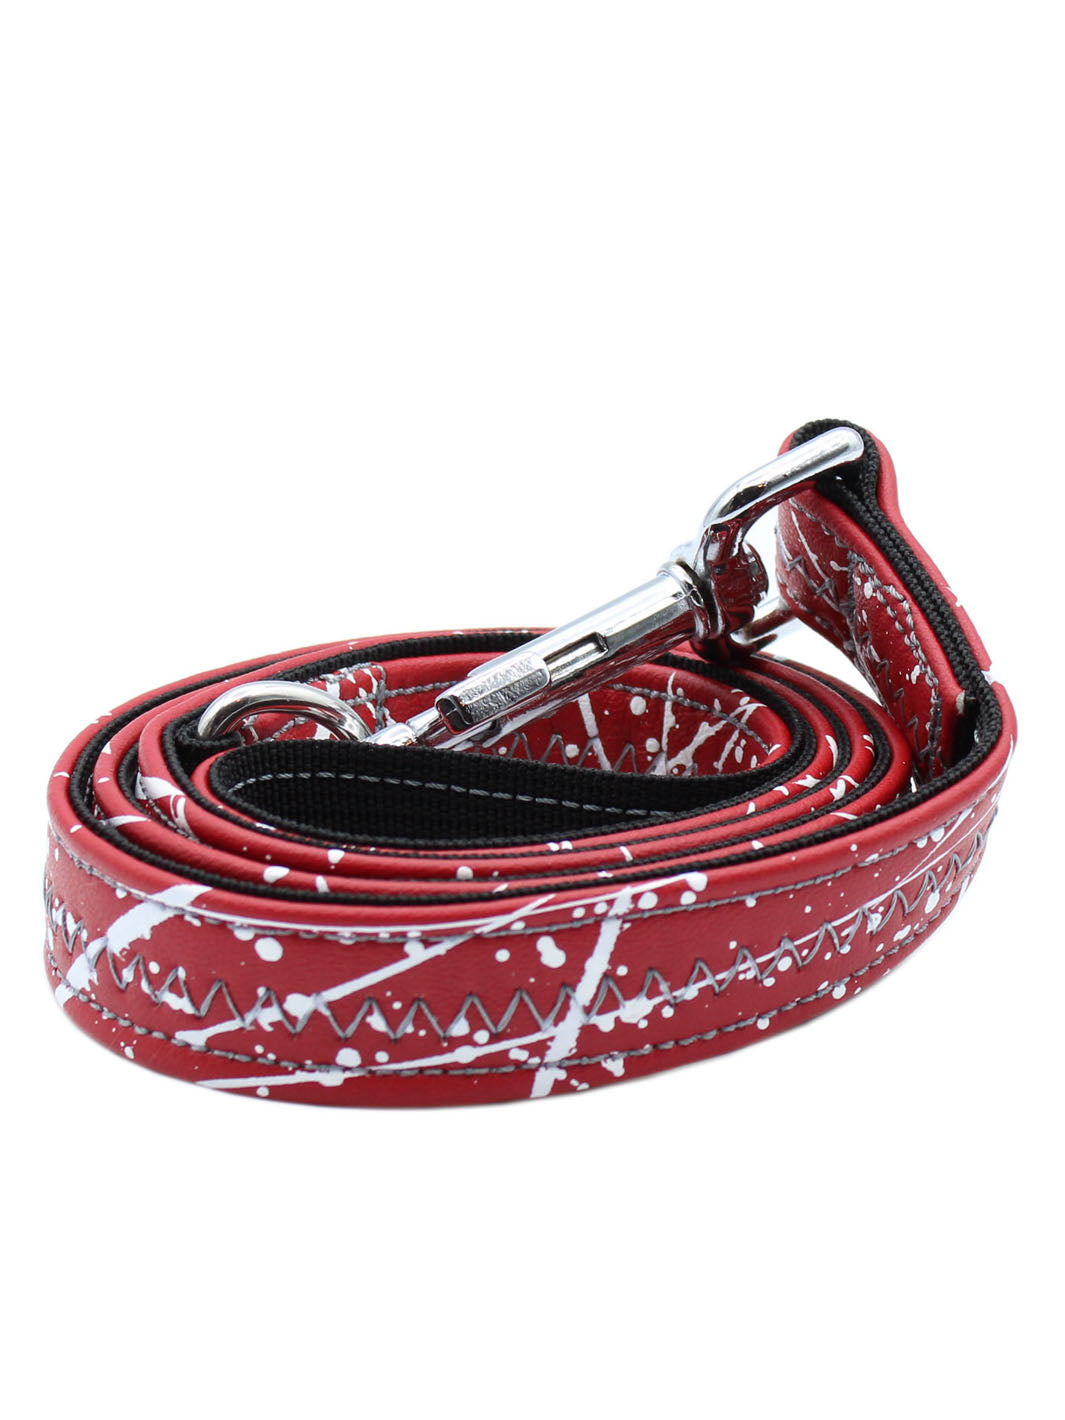 A hand painted red and white vegan leather dog leash by MAGNUS Canis.